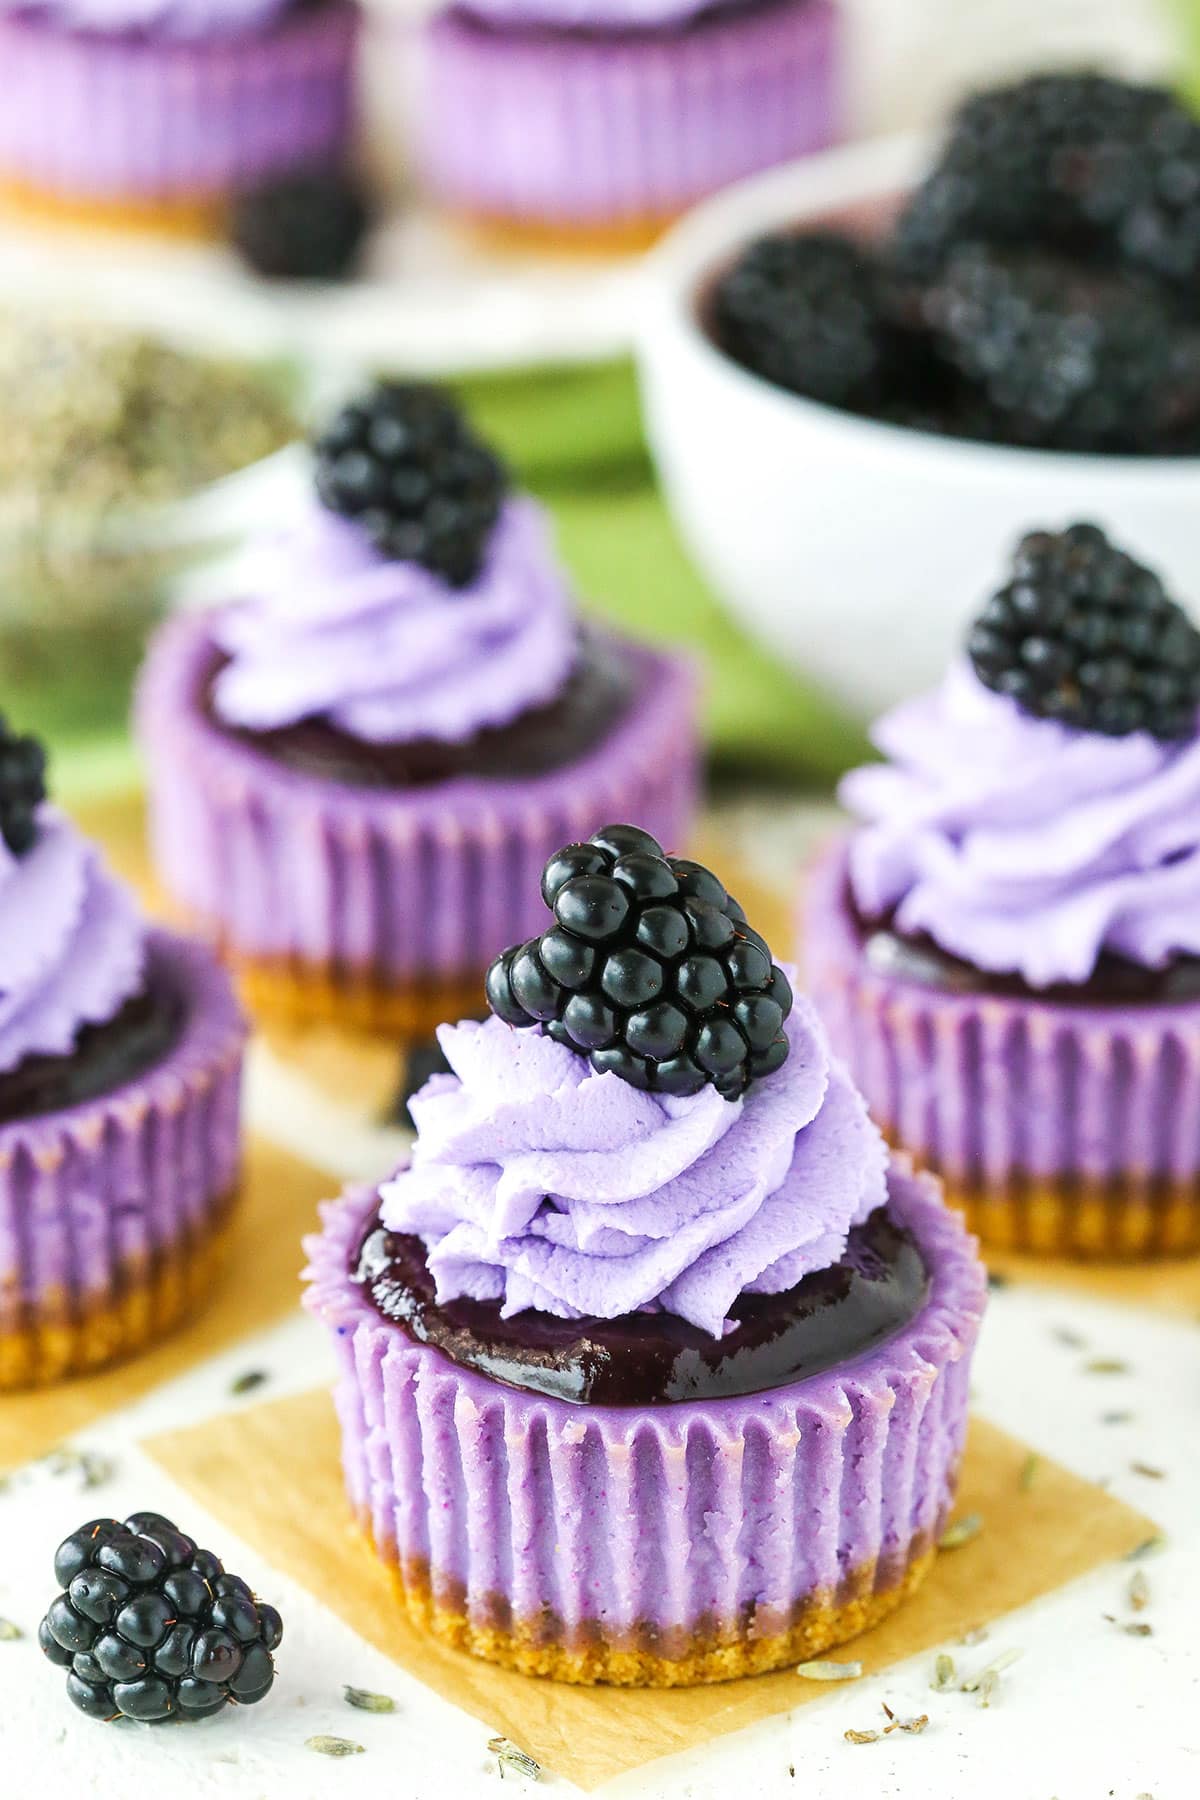 Mini Blackberry Lavender Cheesecakes are made with lavender cheesecake, blackberry topping, whipped cream and a fresh blackberry on top!